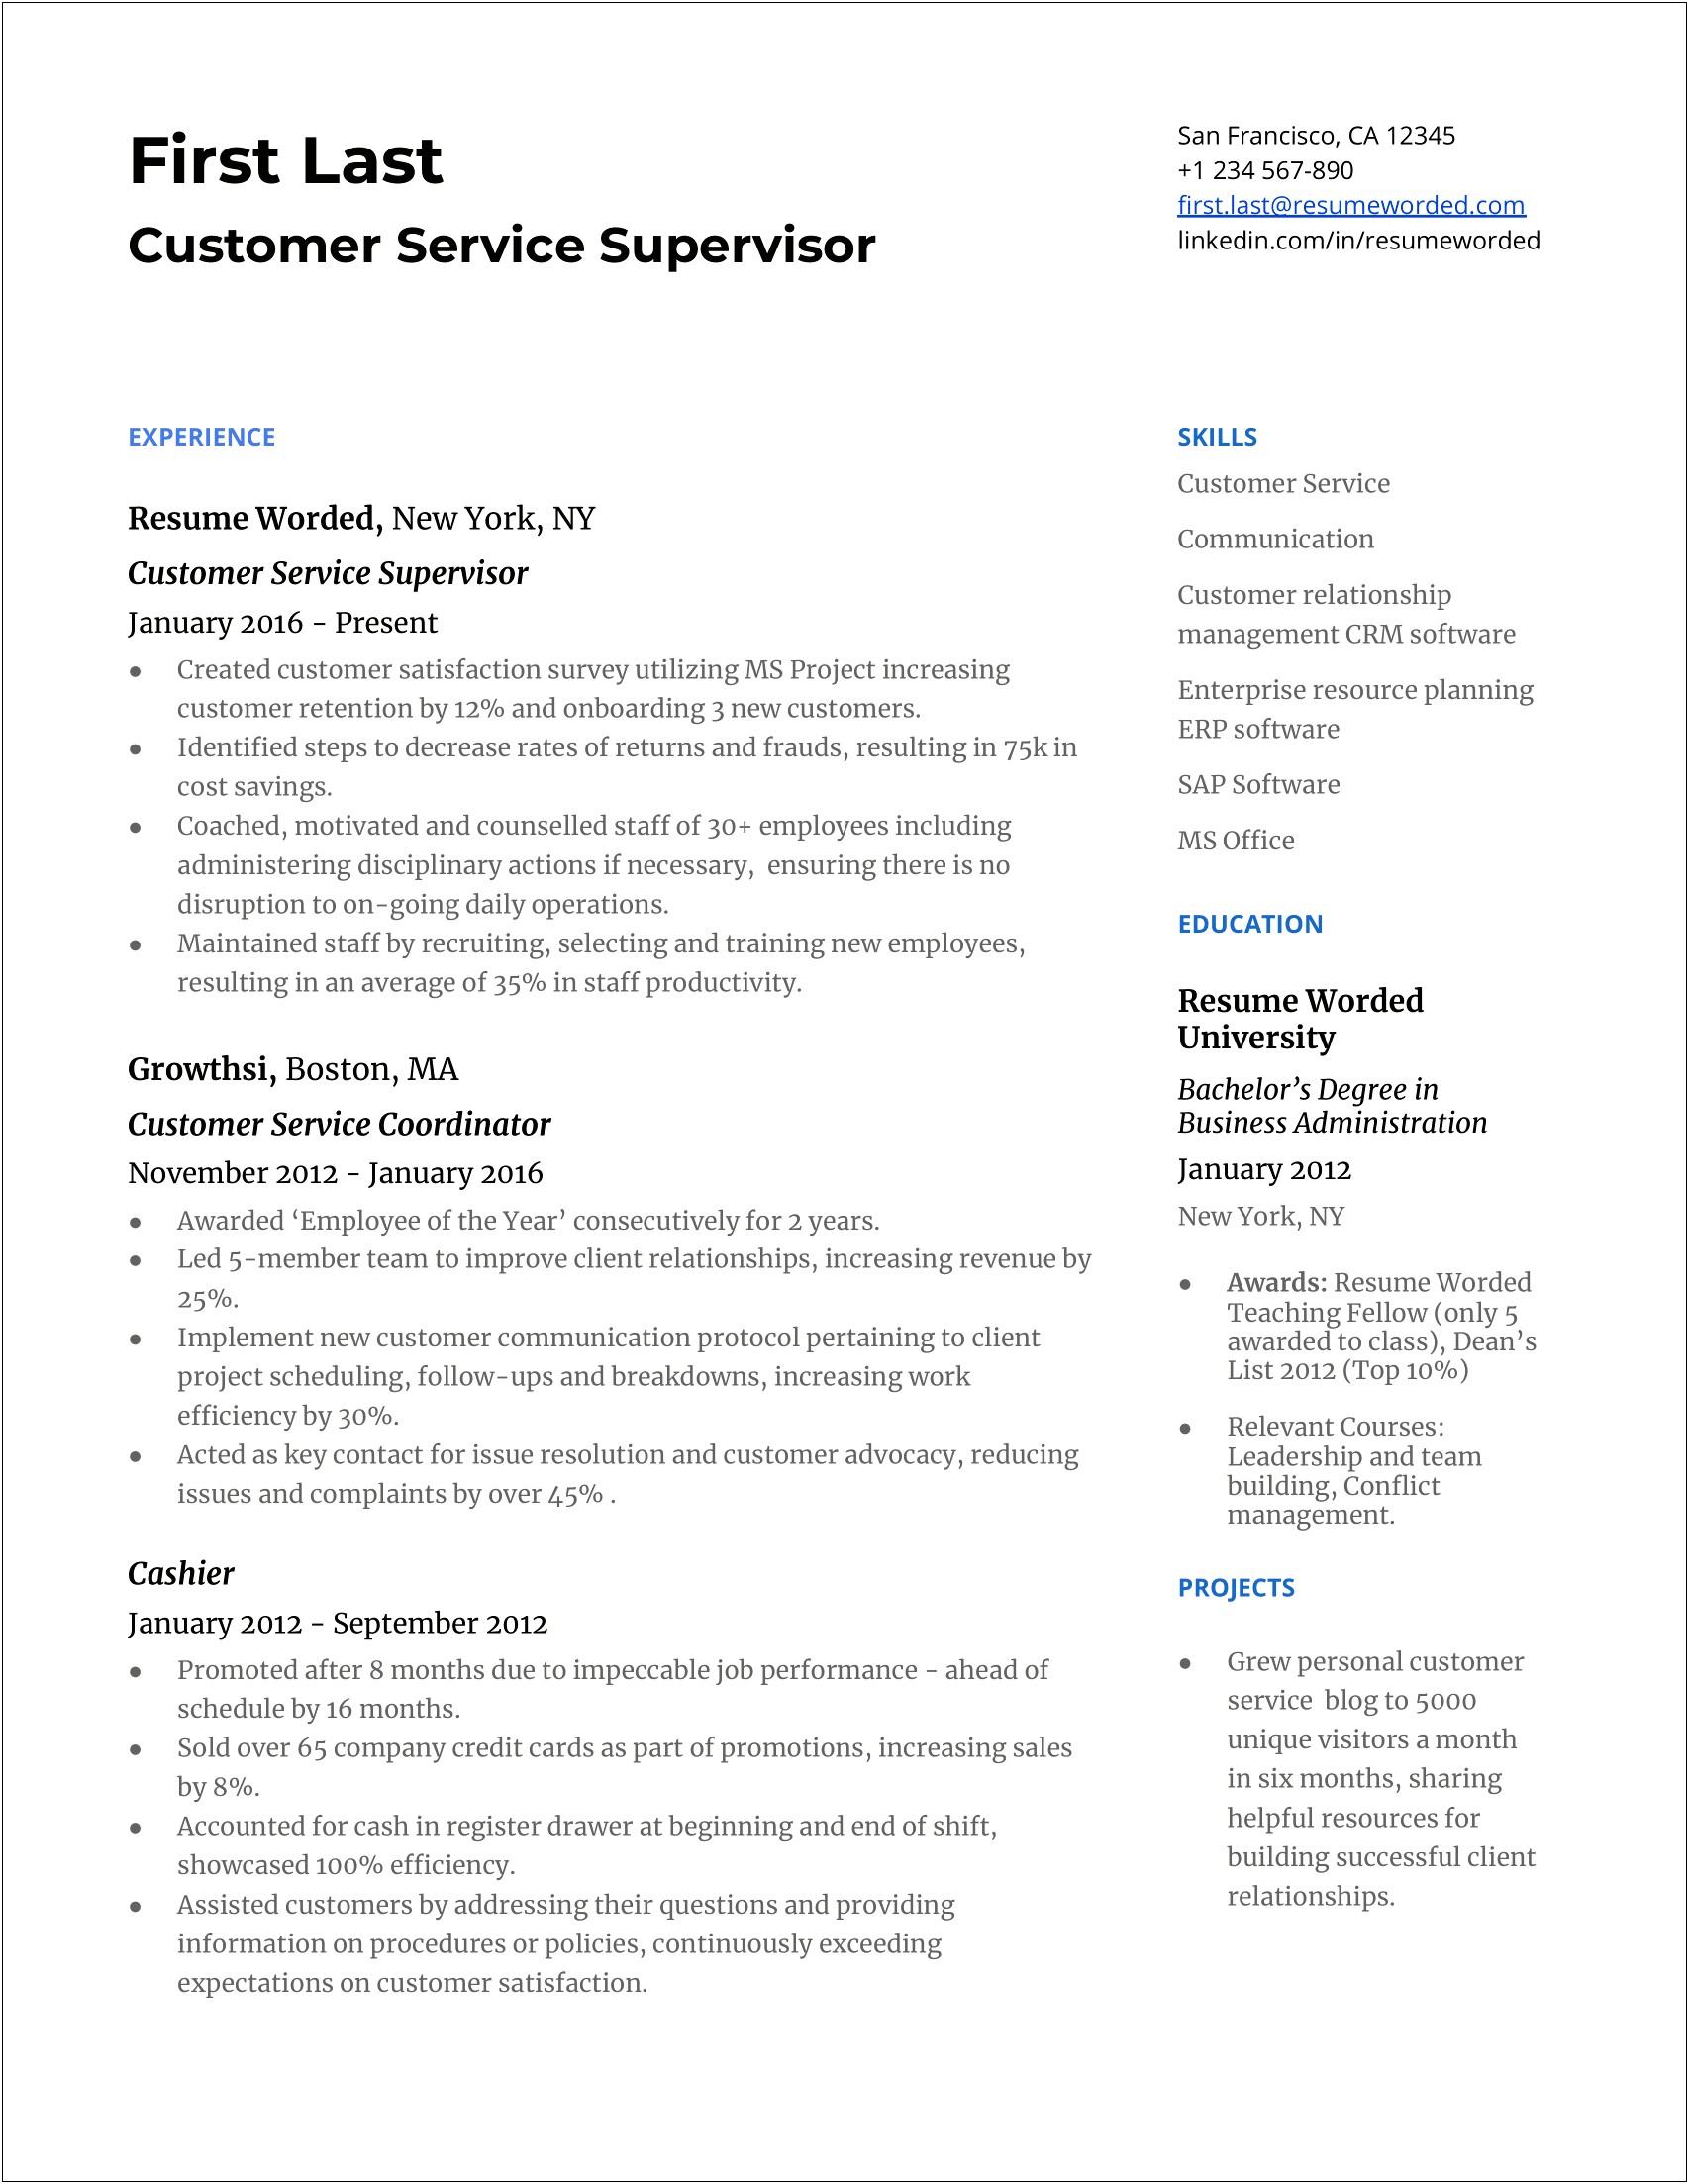 Resume Examples For Customer Service Companies